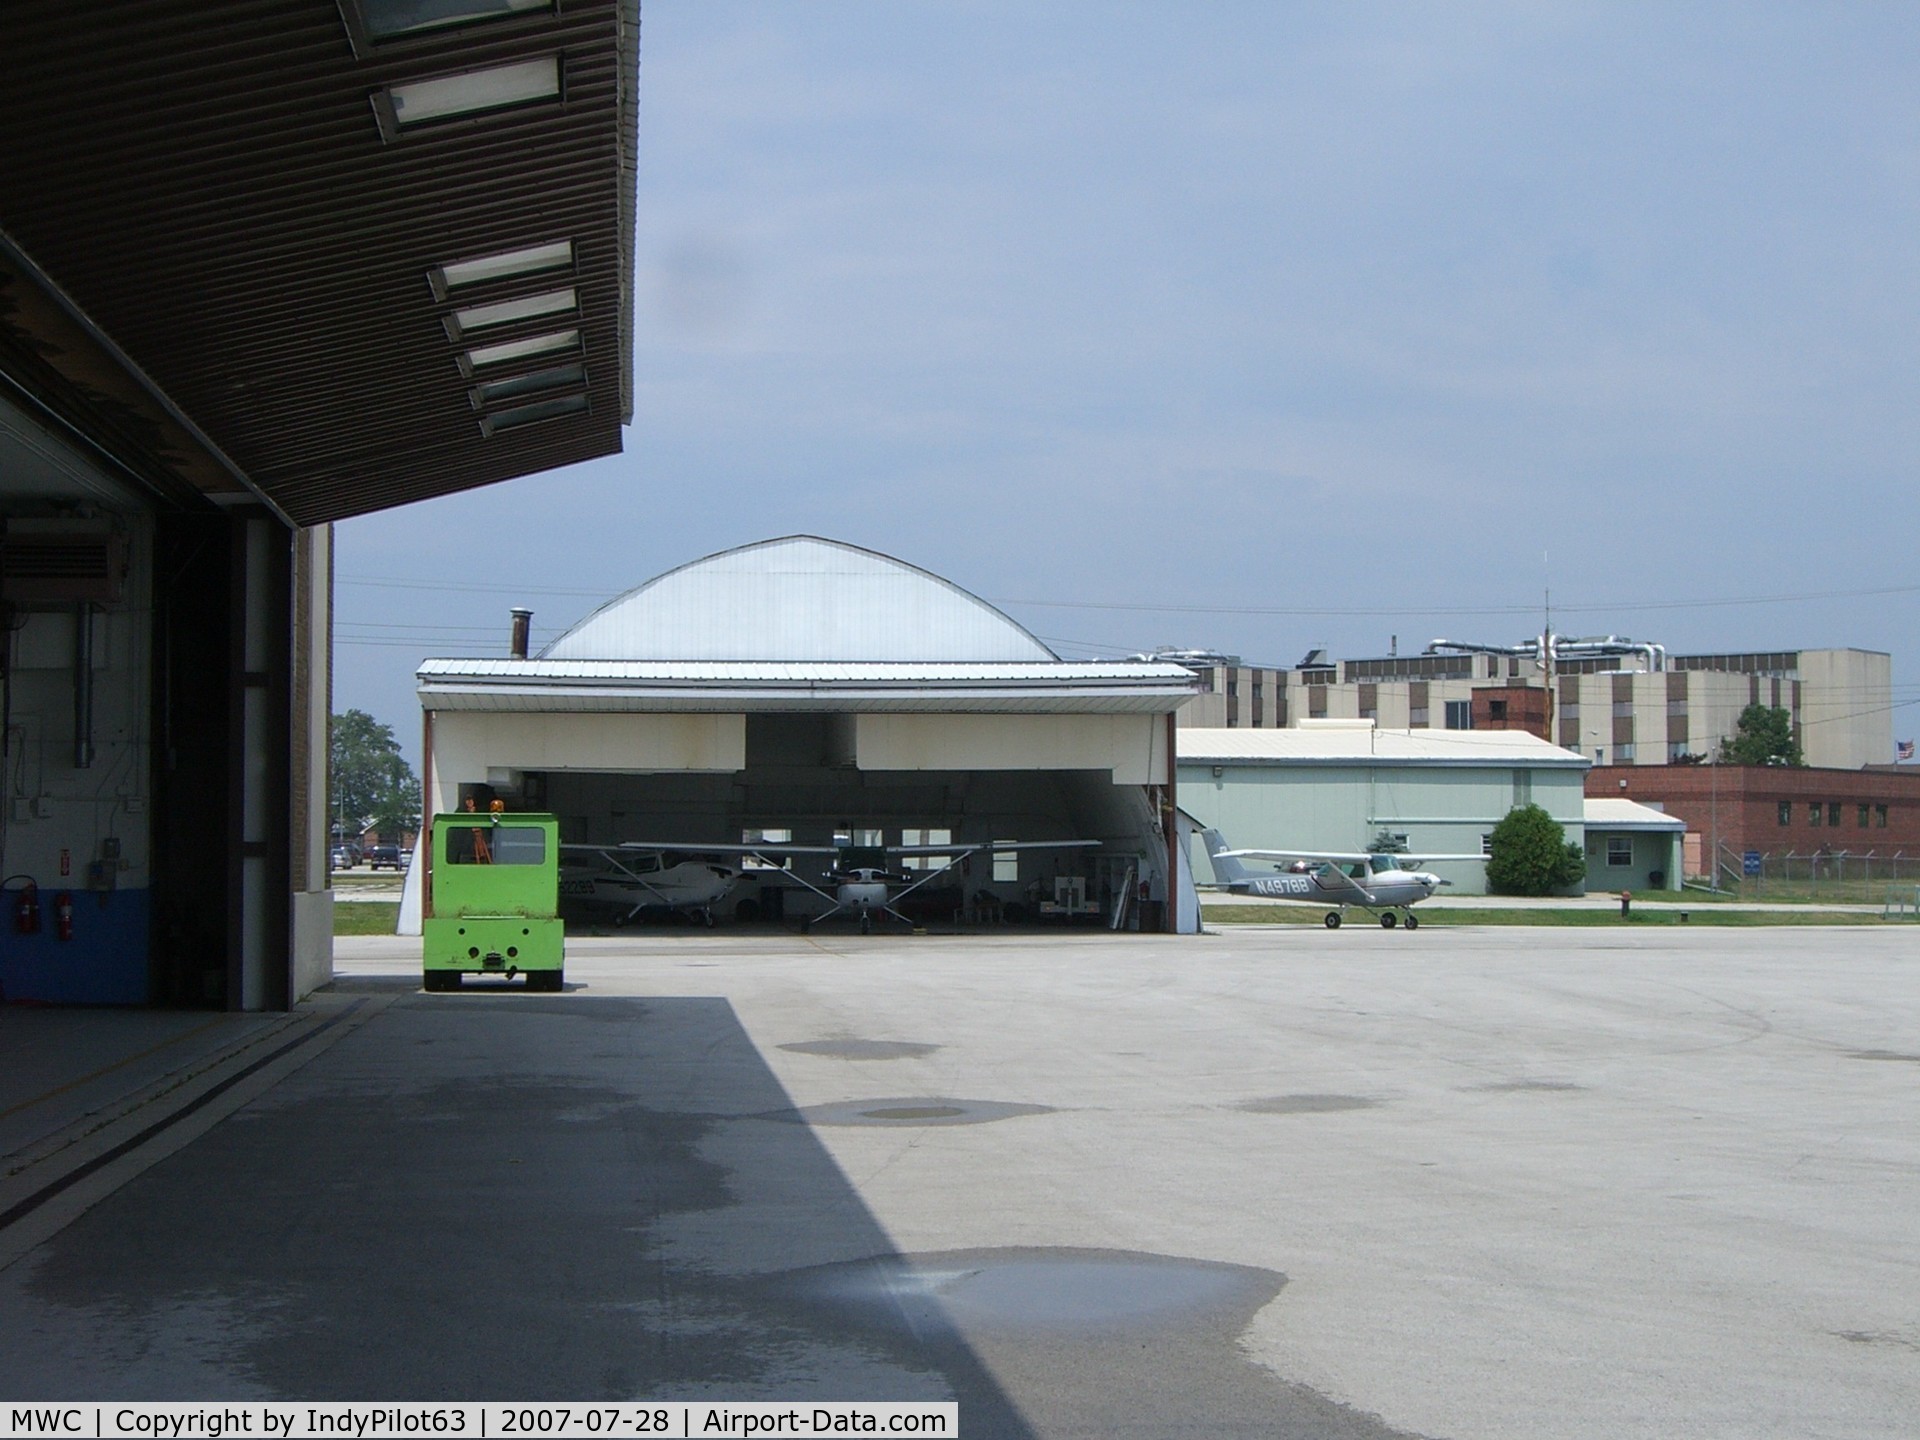 Lawrence J Timmerman Airport (MWC) - A shot by the fbo hangar...a nice stop on the way to Oshkosh...